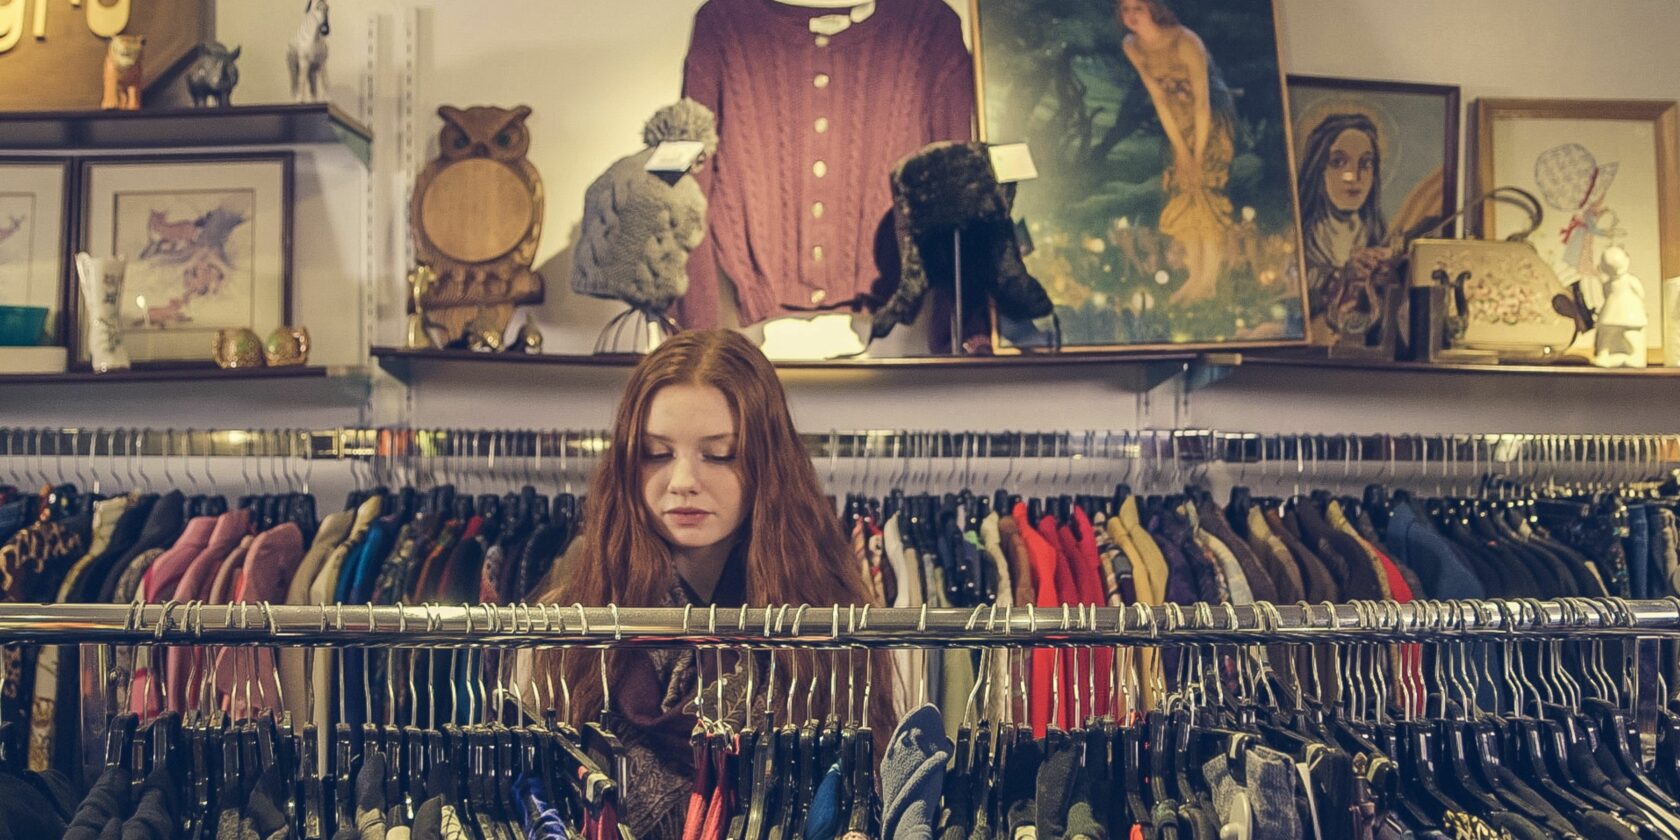 girl looking through thrifted clothes